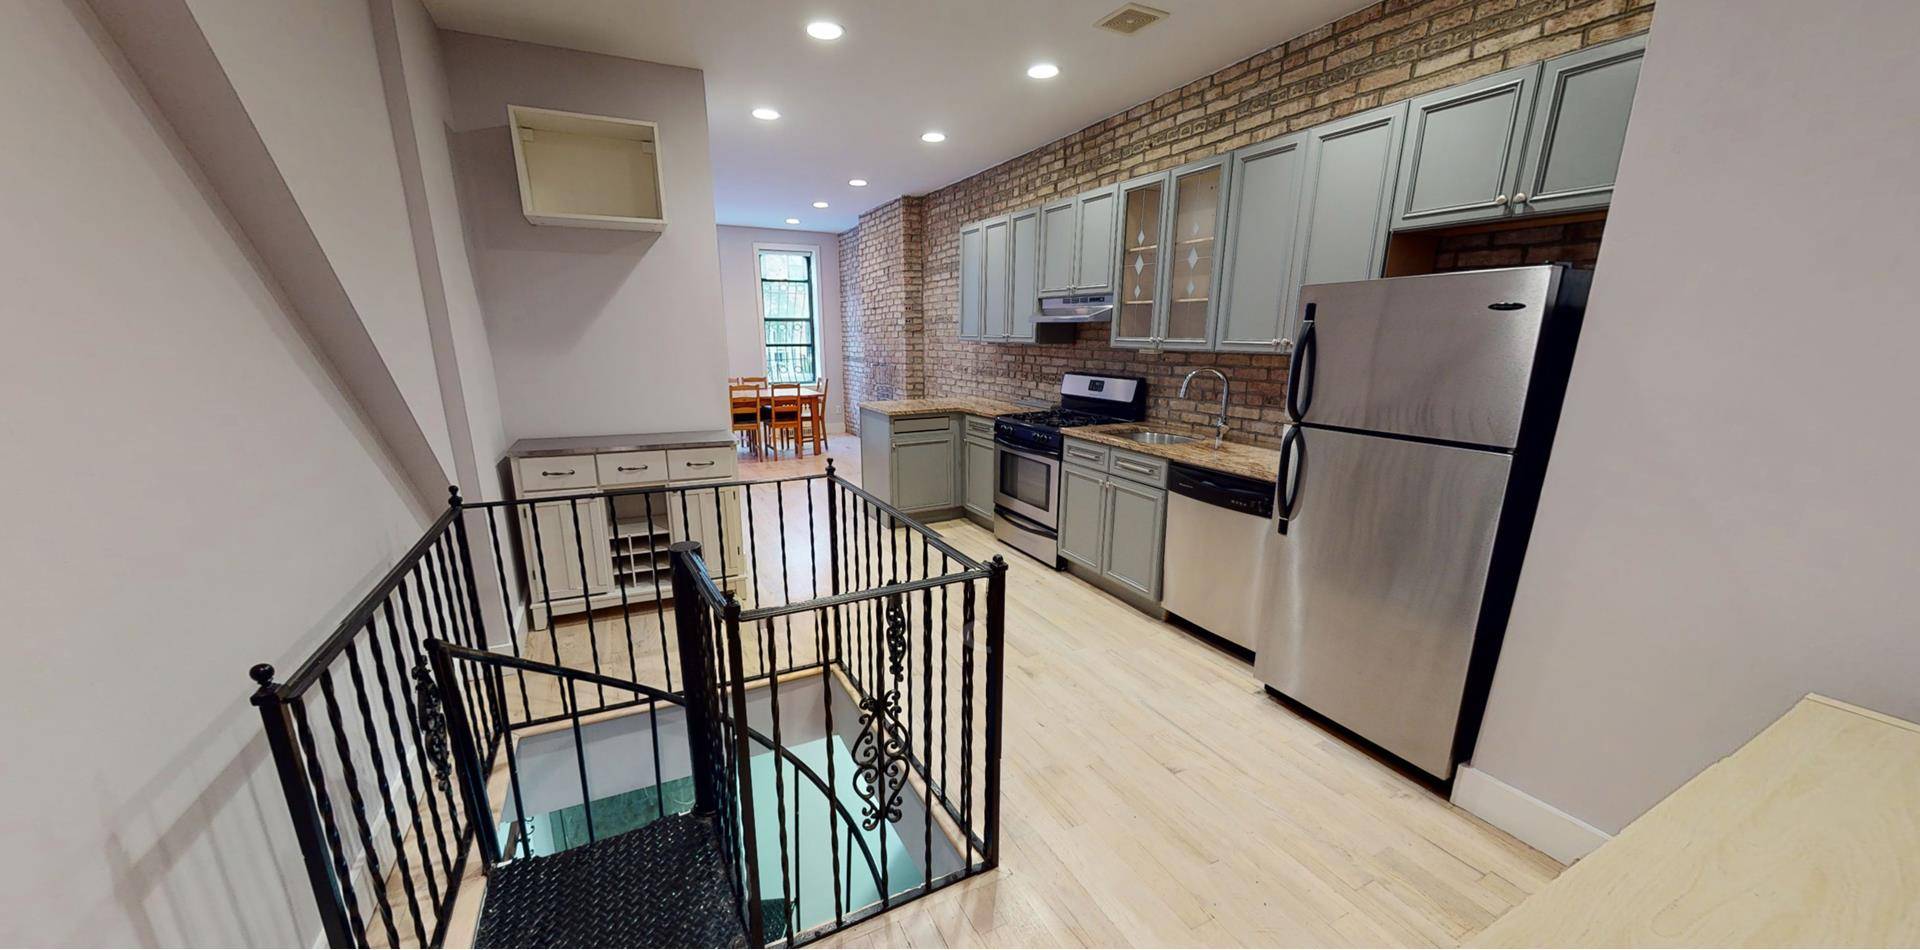 1, 227 square foot duplex with a 341 square foot private backyard in tranquil Bushwick.